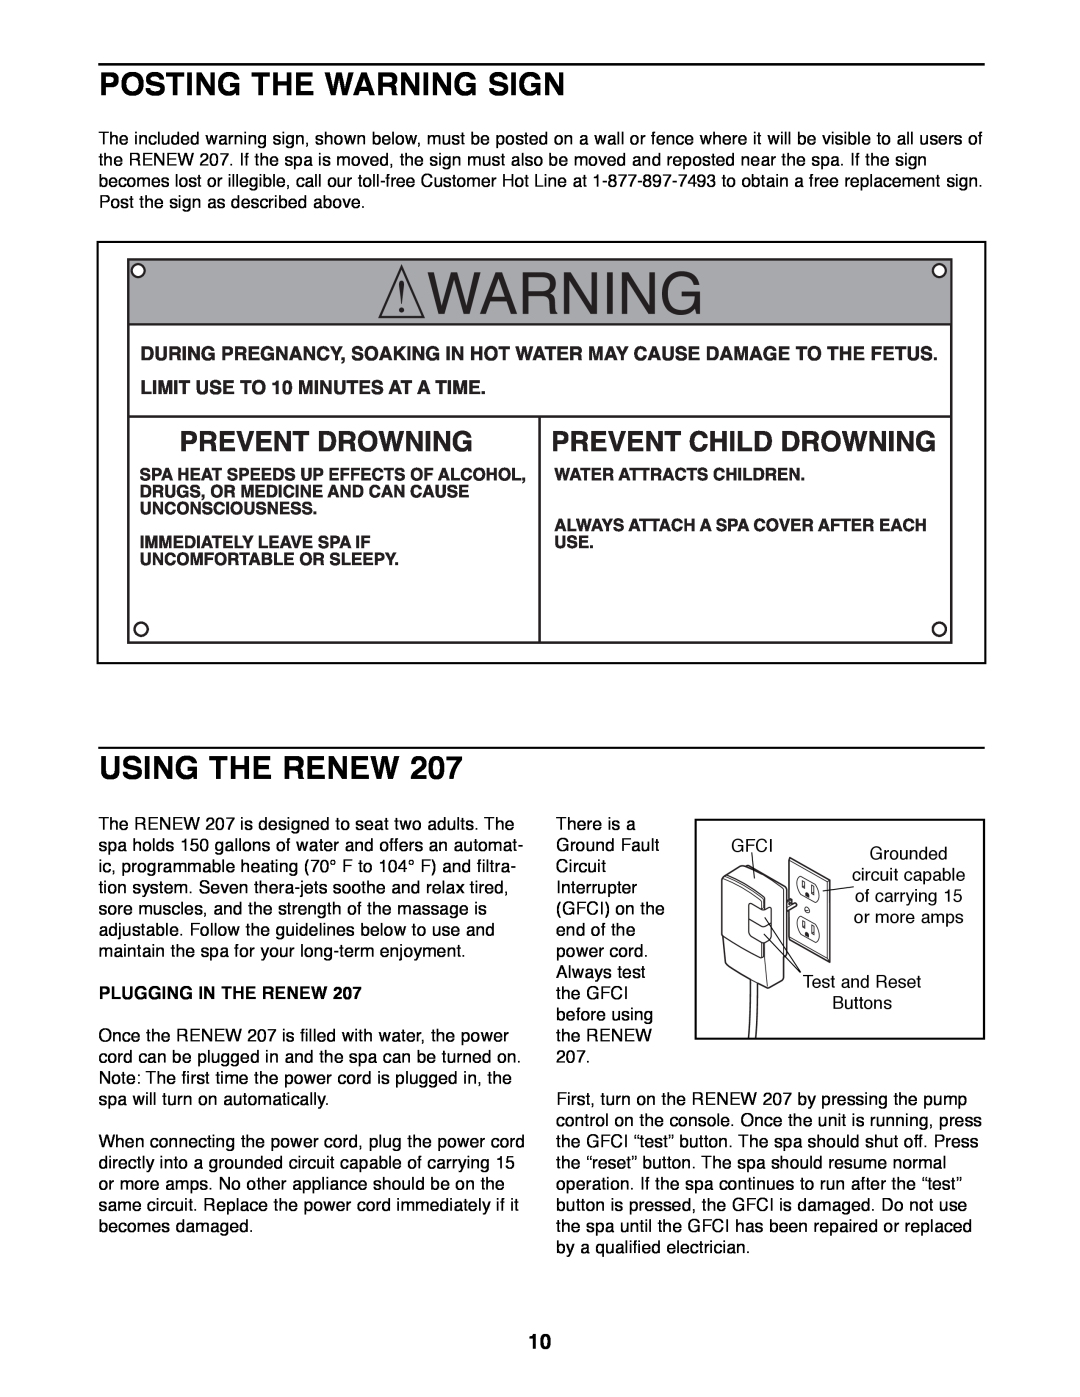 Image 831.21007 manual Posting The Warning Sign, Using The Renew, Plugging In The Renew 